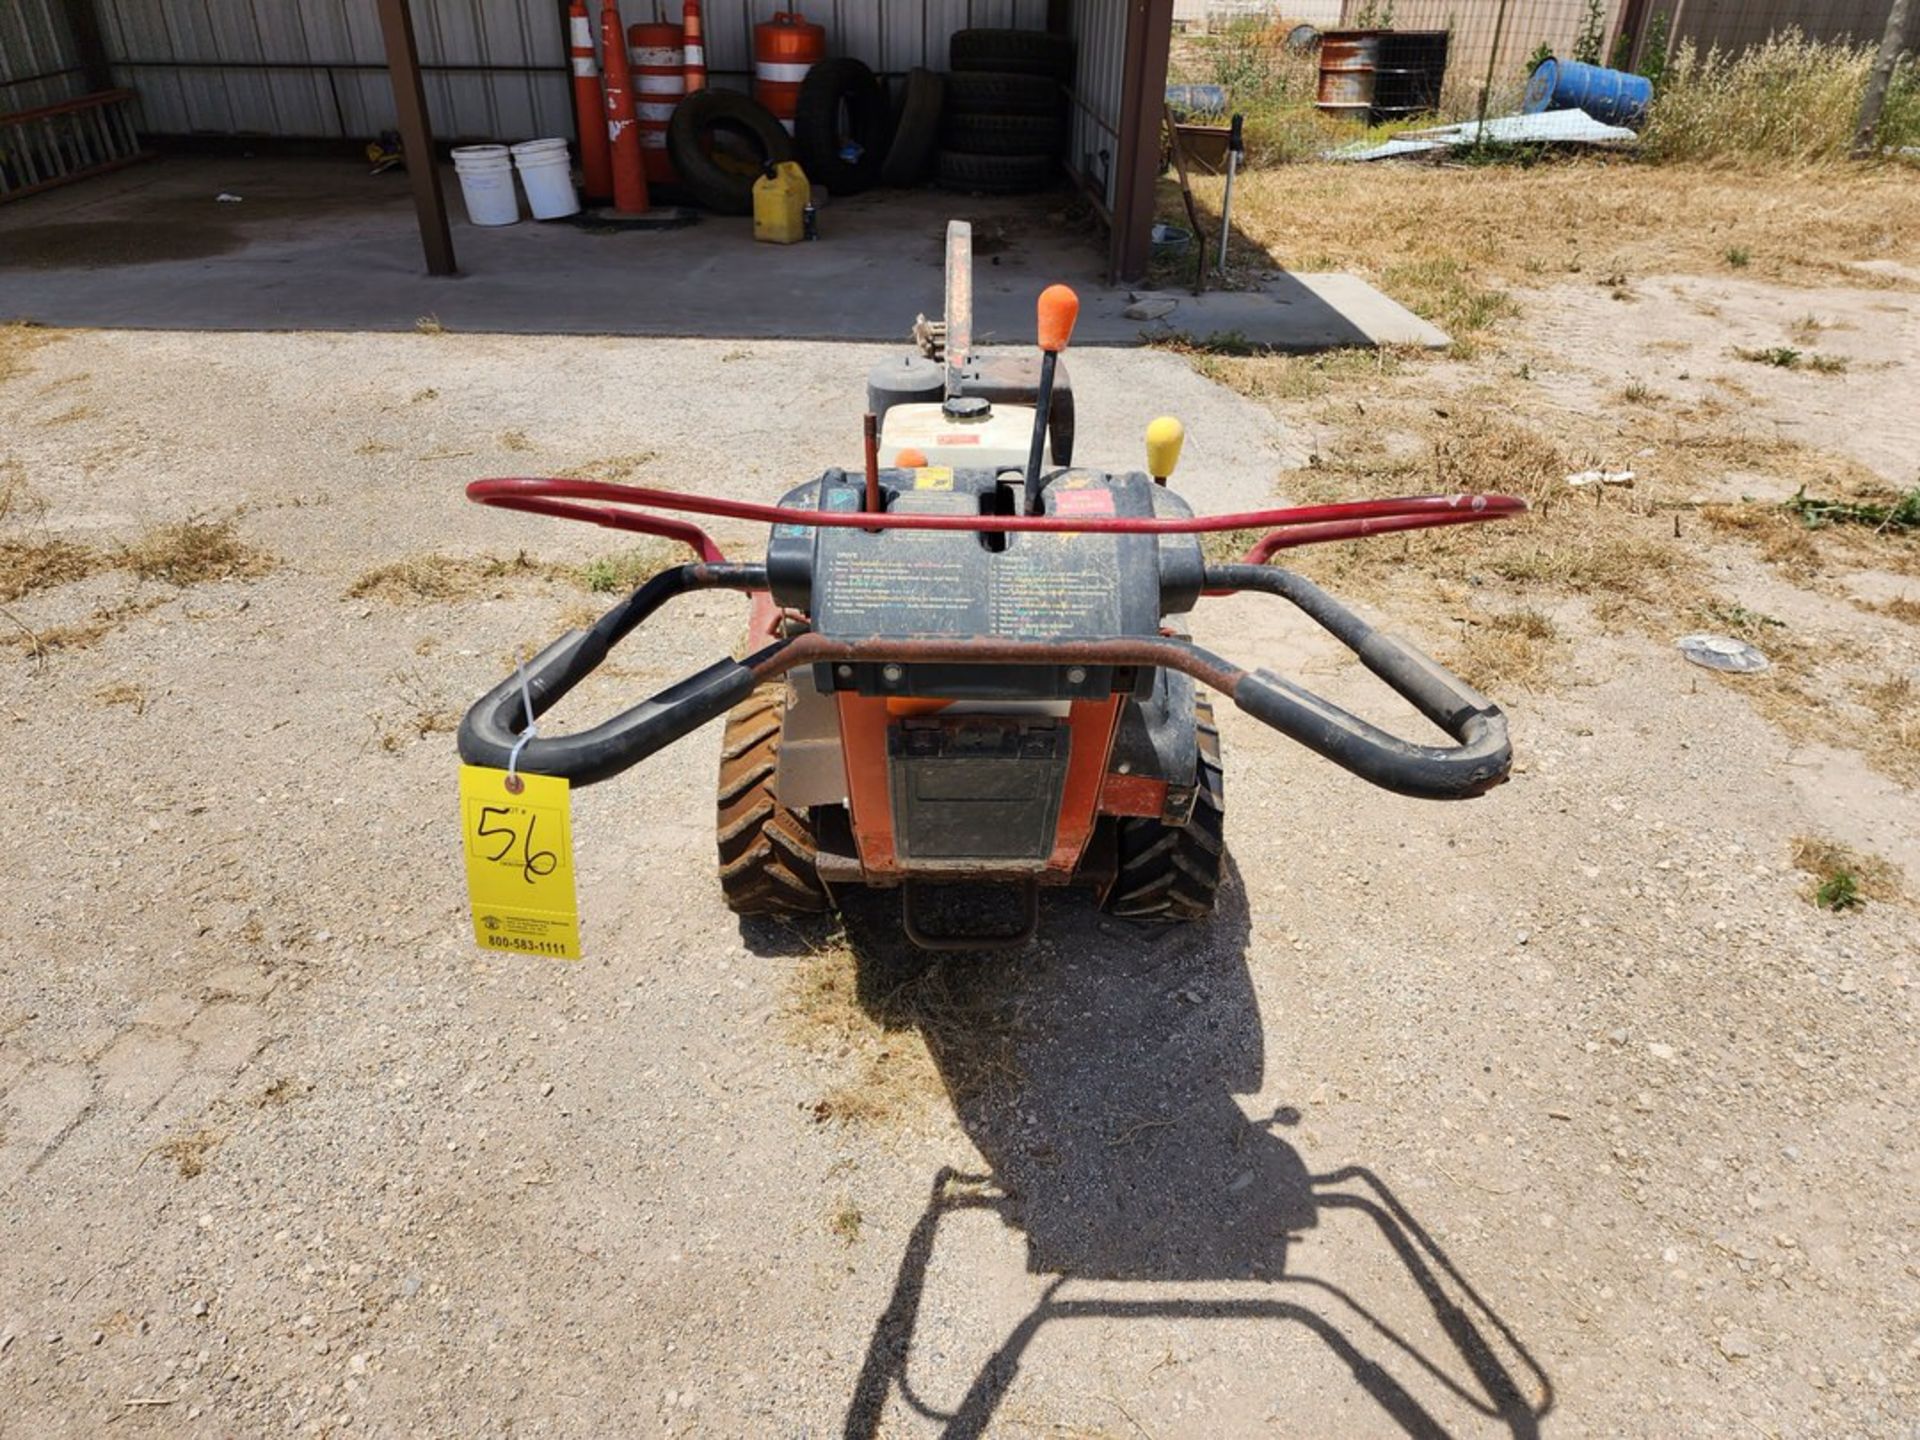 Ditch Witch Trencher W/ Honda 13.0 GX390 Motor (No Tag) - Image 2 of 9